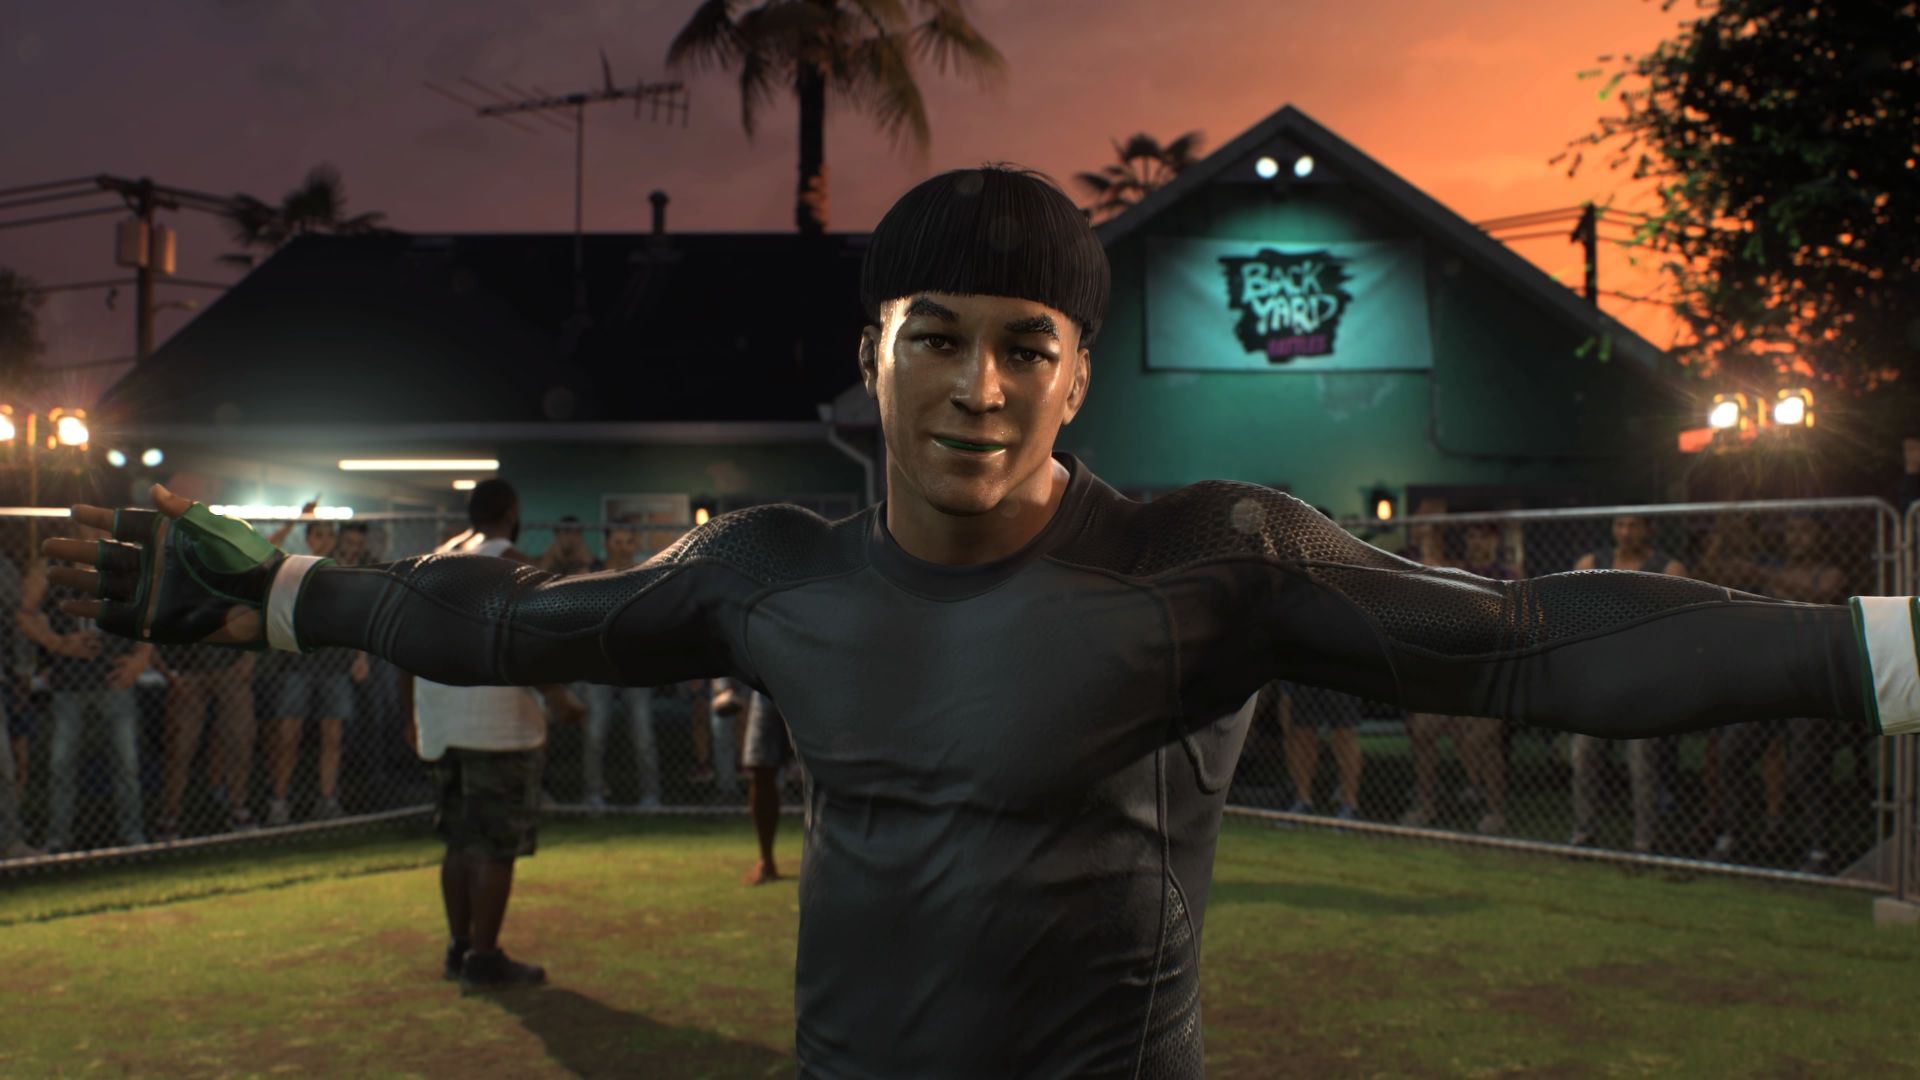 Screenshot from UFC 5 shows custom fighter celebrating after a win in a backyard match. A chainlink fence blocks off the arena with onlookers behind it. Character has black hair and a bowl cut.